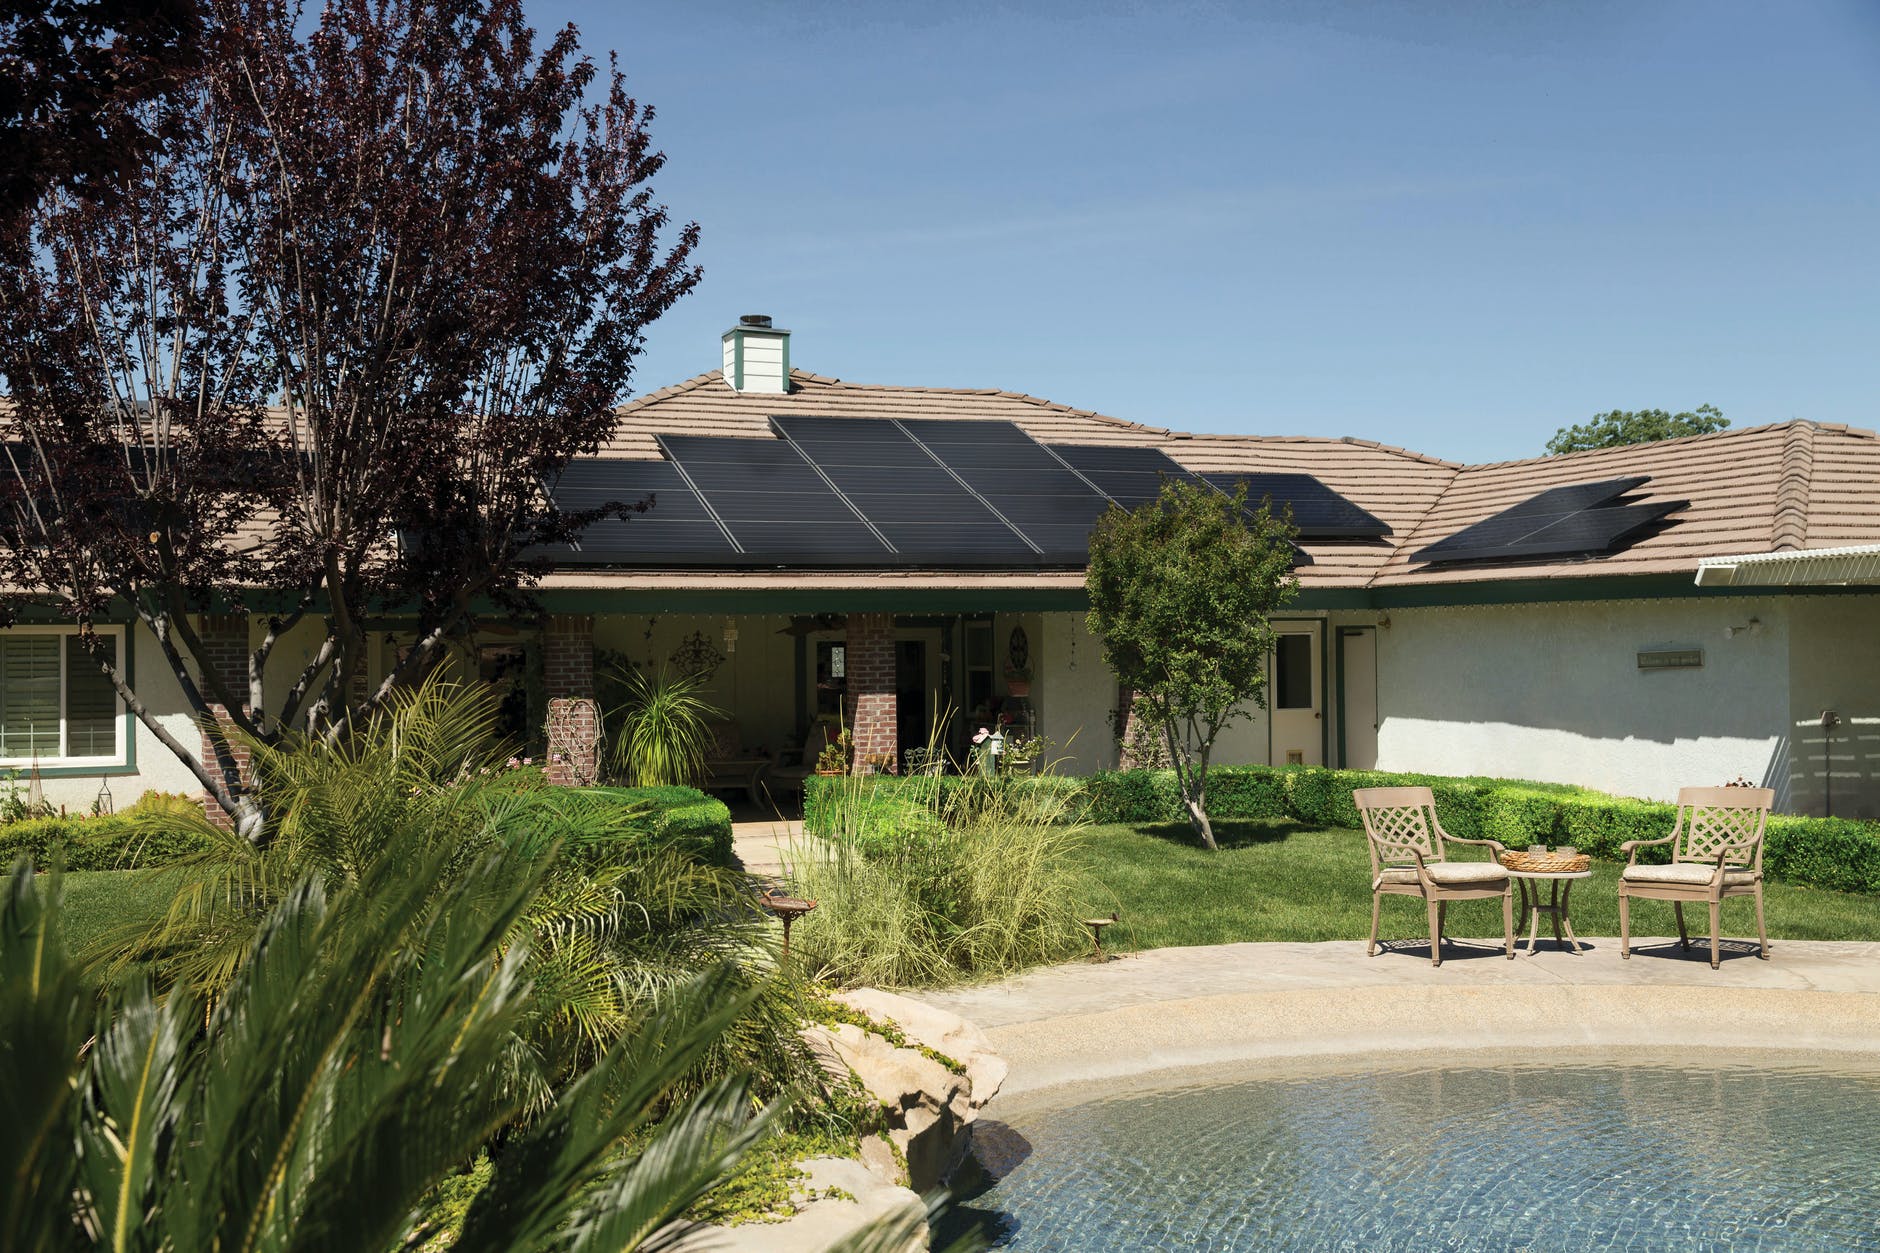 How will technology change in the next 20 years? Black solar panels on brown roof